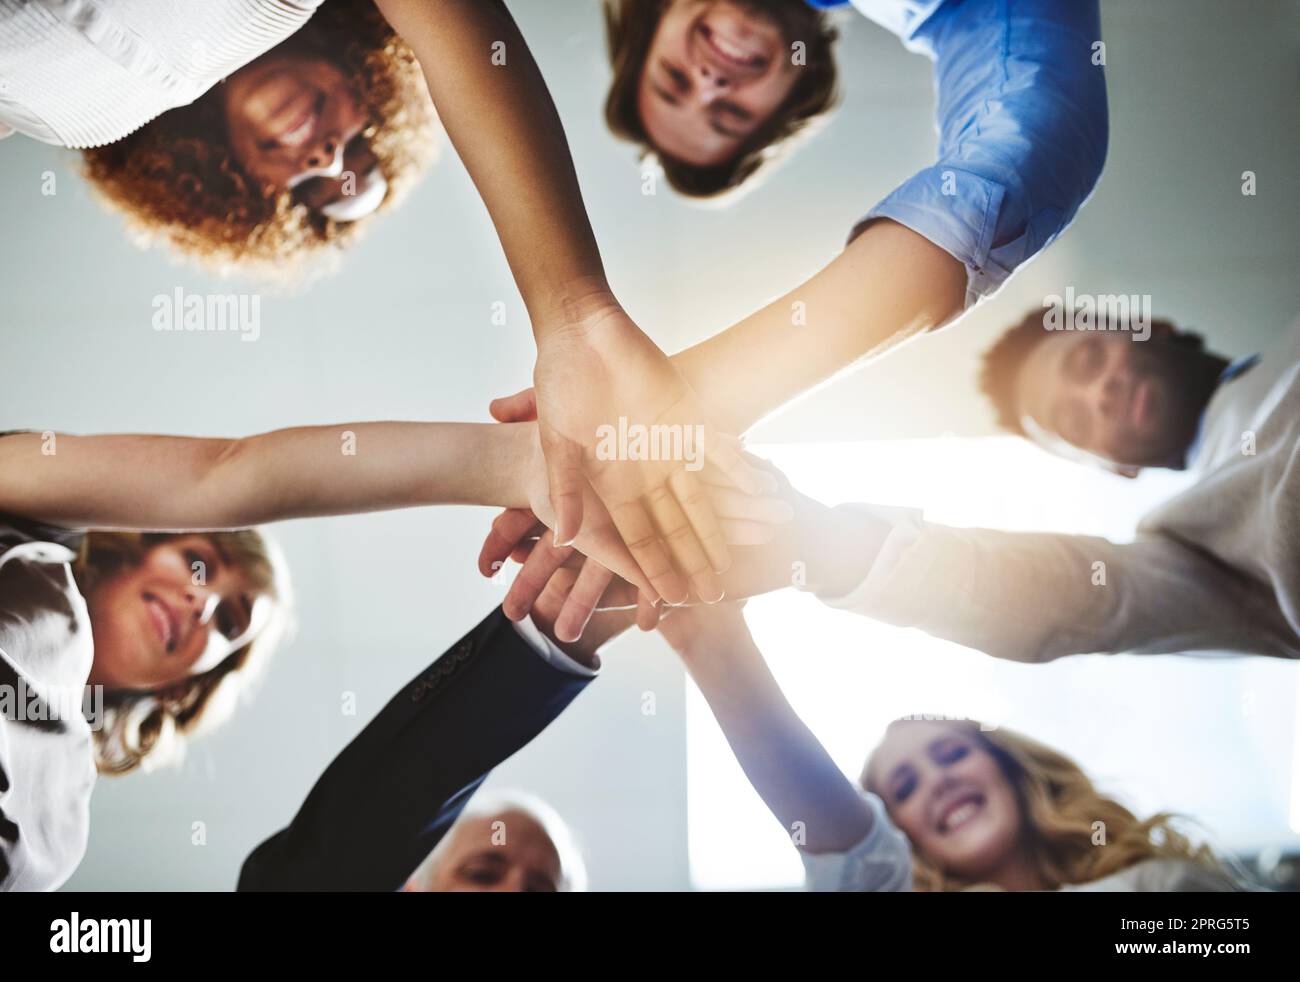 When we go all in we all win. Low angle shot of a group of colleagues joining their hands in solidarity. Stock Photo